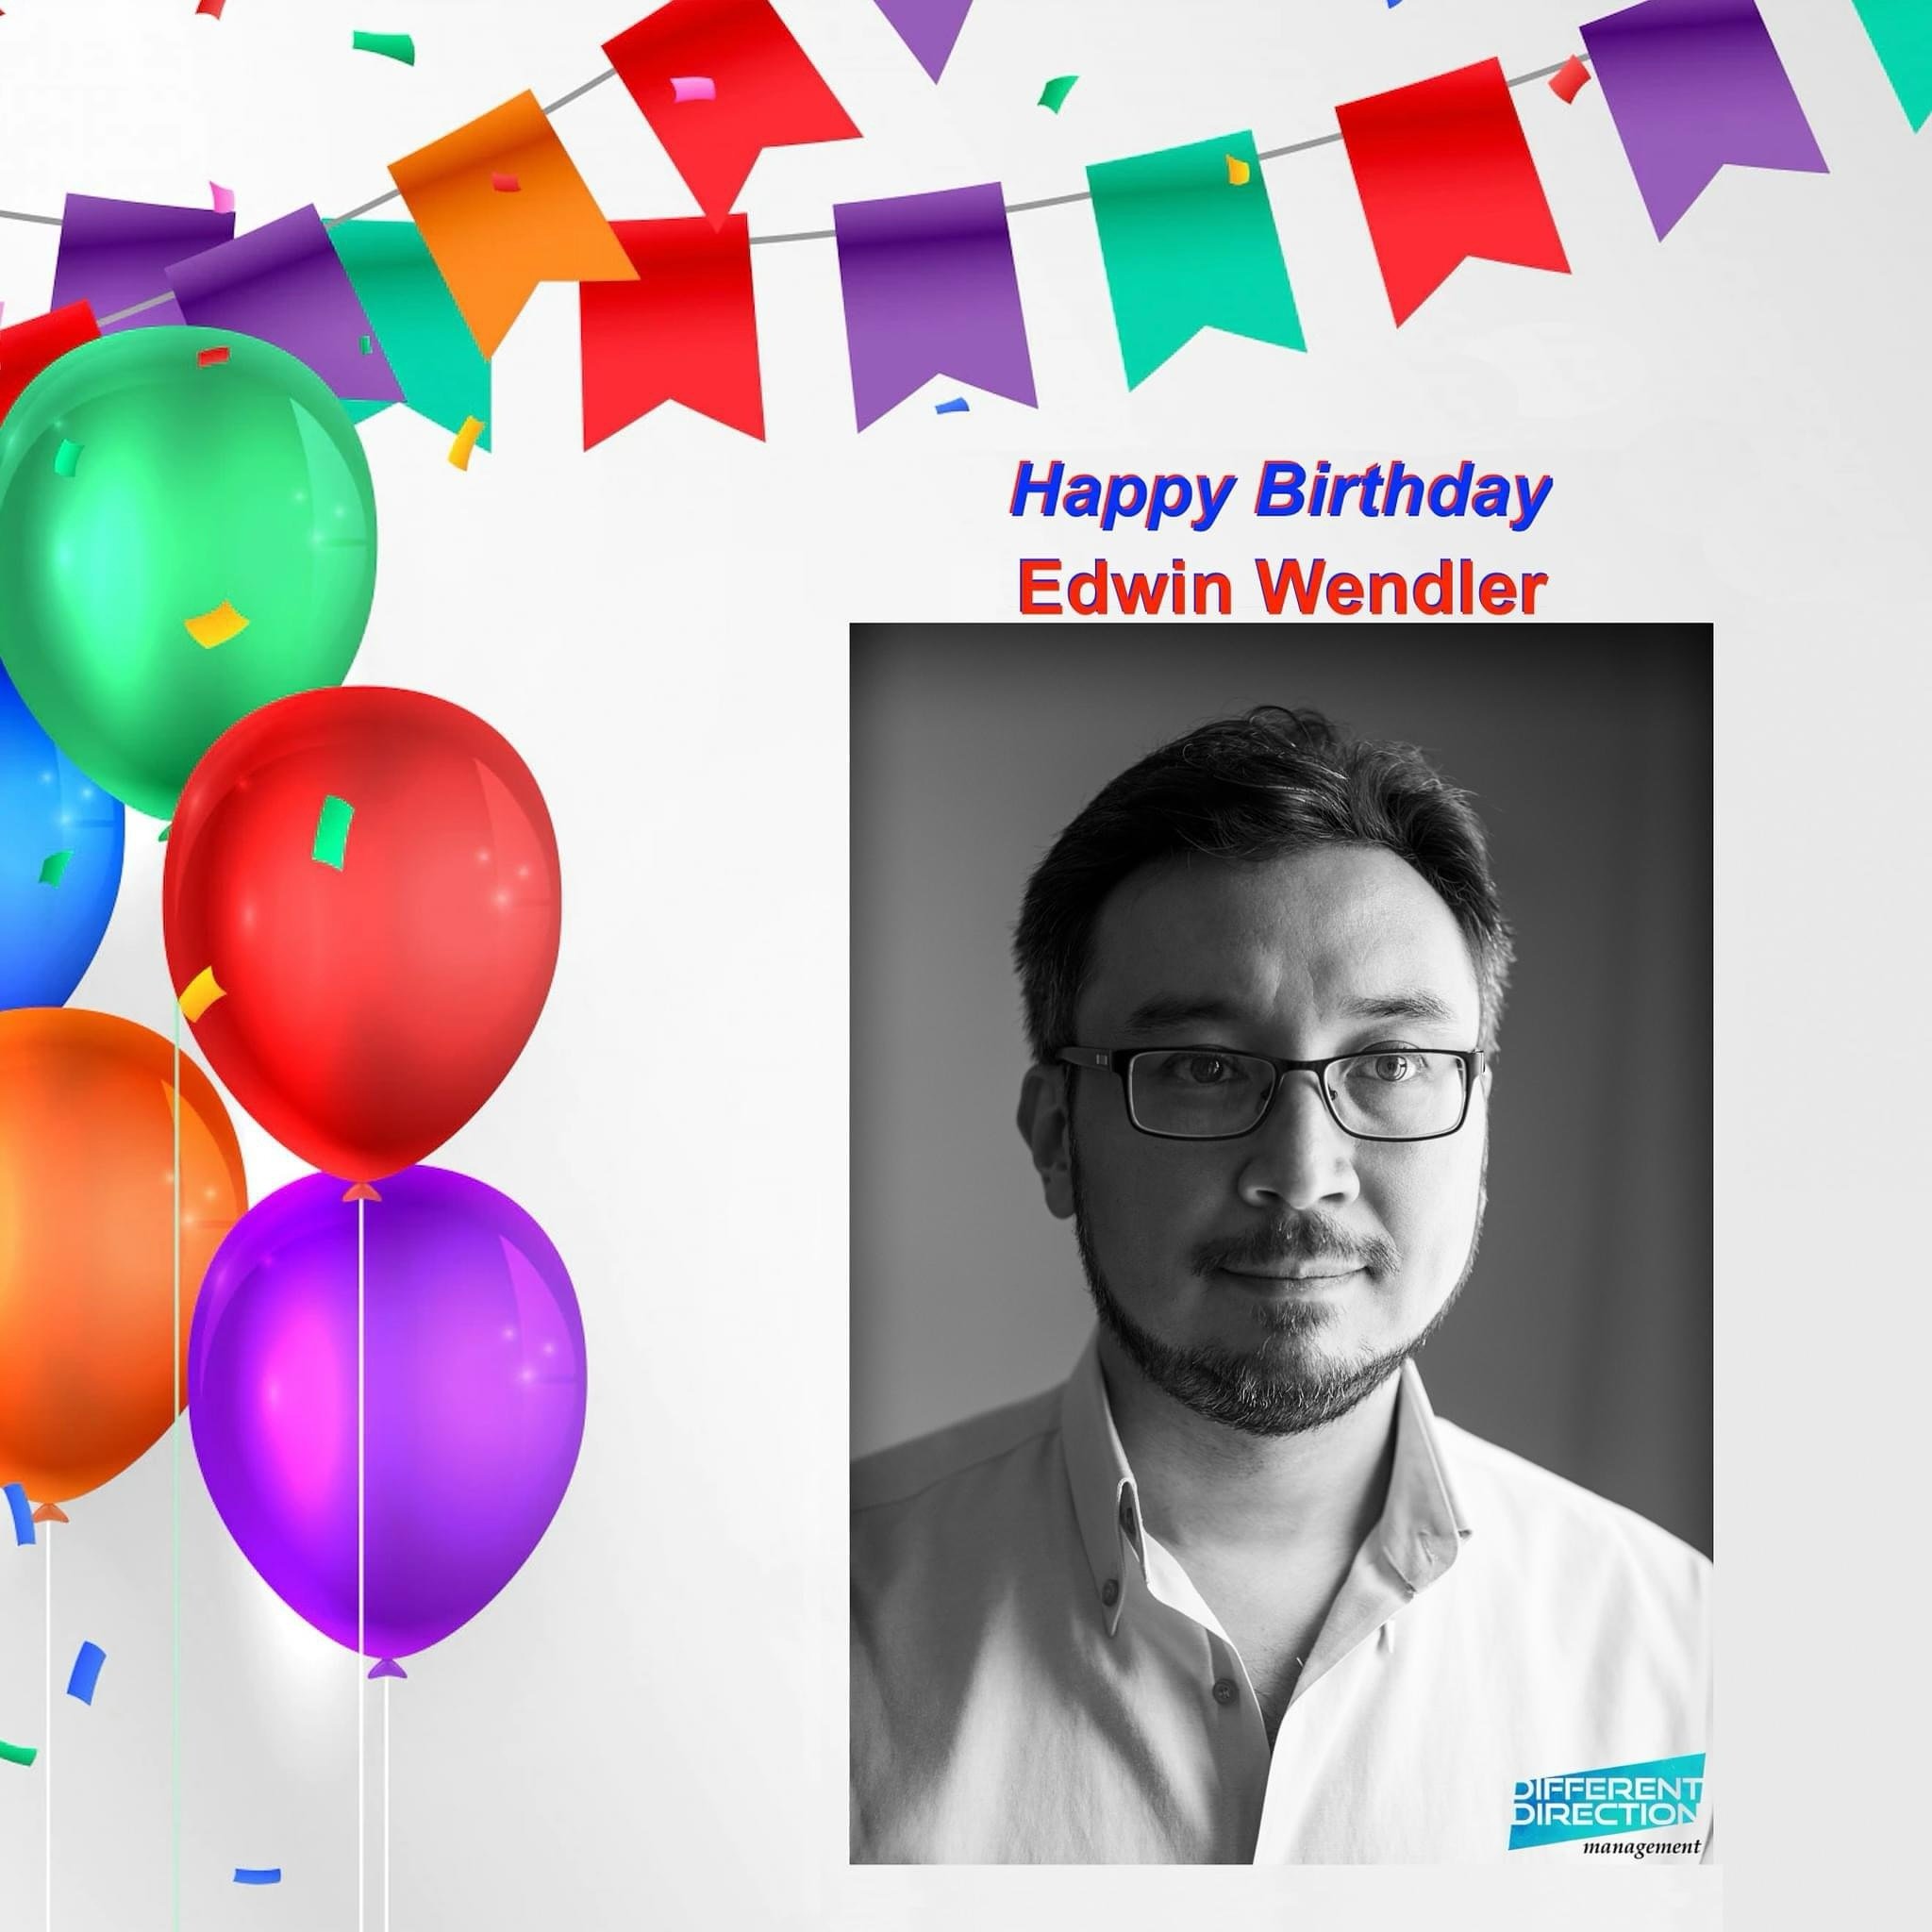 The 2nd of our three birthday celebration is Edwin Wendler! He&rsquo;s the composer behind the highly anticipated film DREAMSCAPES starring Oscar winner Kate Winslet &amp; the action thriller DEEP SIX starring Cam Gigandet &amp; Tom Welling.

Help us